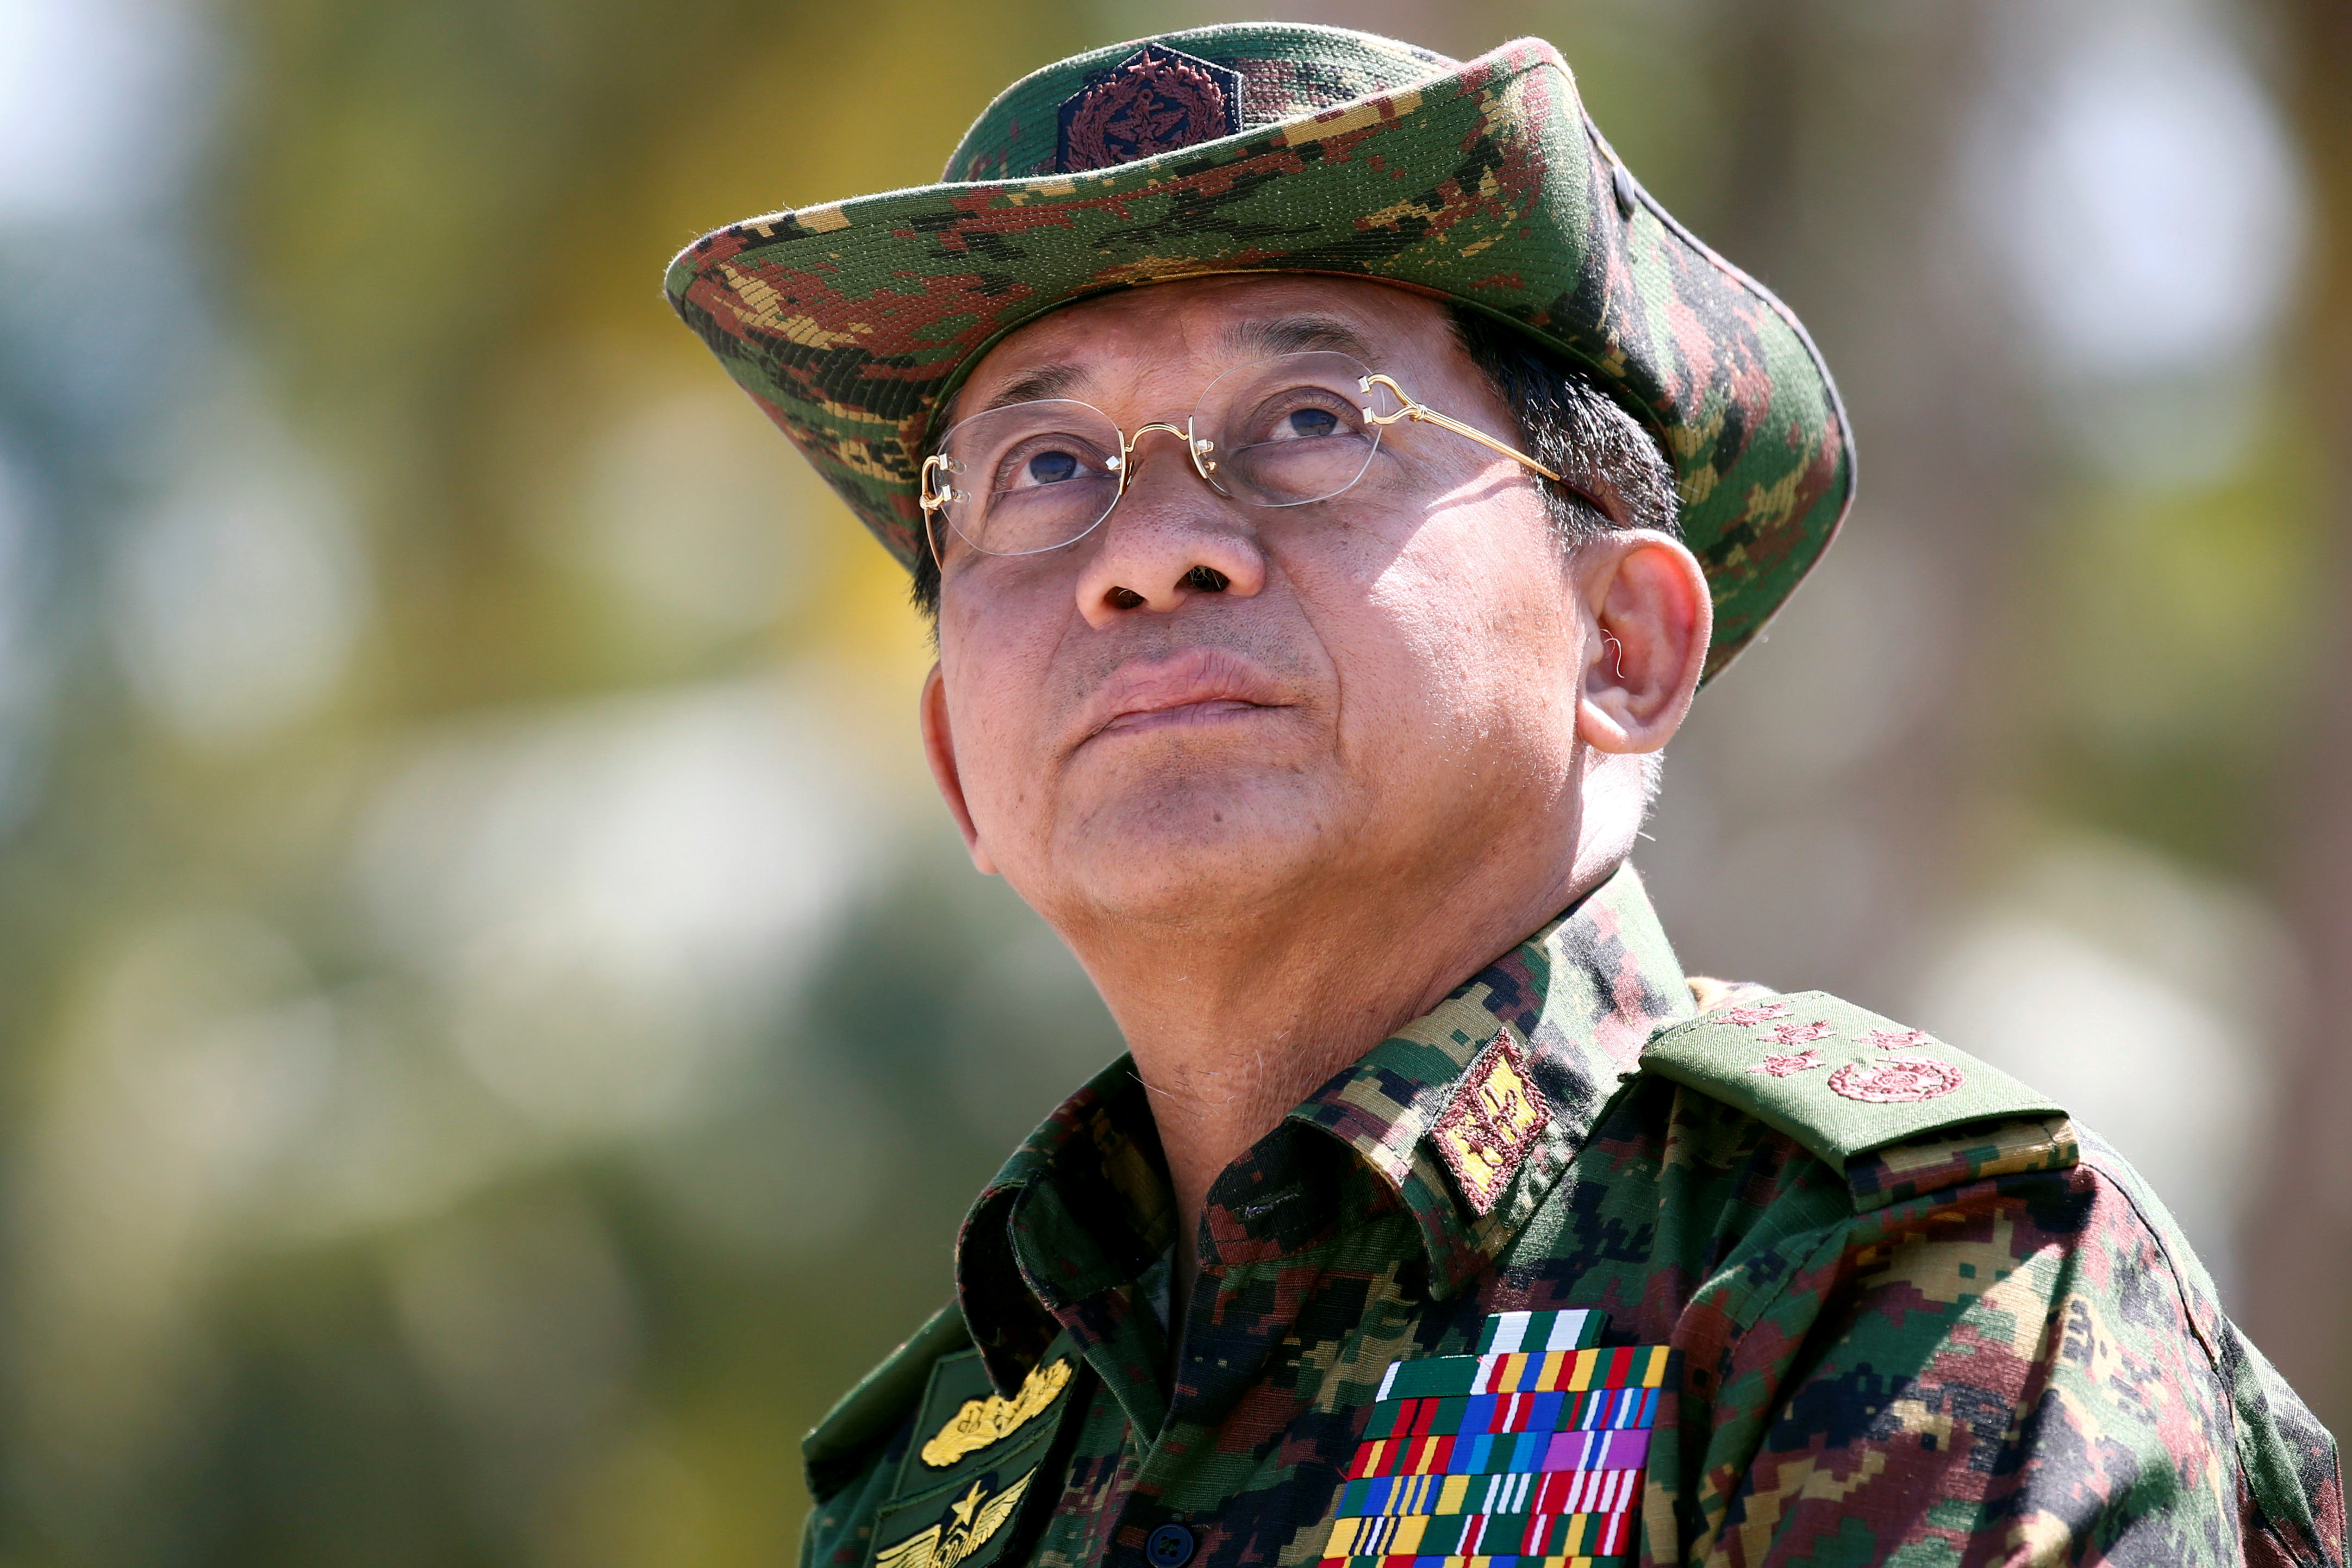 Myanmar military commander-in-chief, Senior General Min Aung Hlaing, attends a military exercise at Ayeyarwaddy delta region in Myanmar